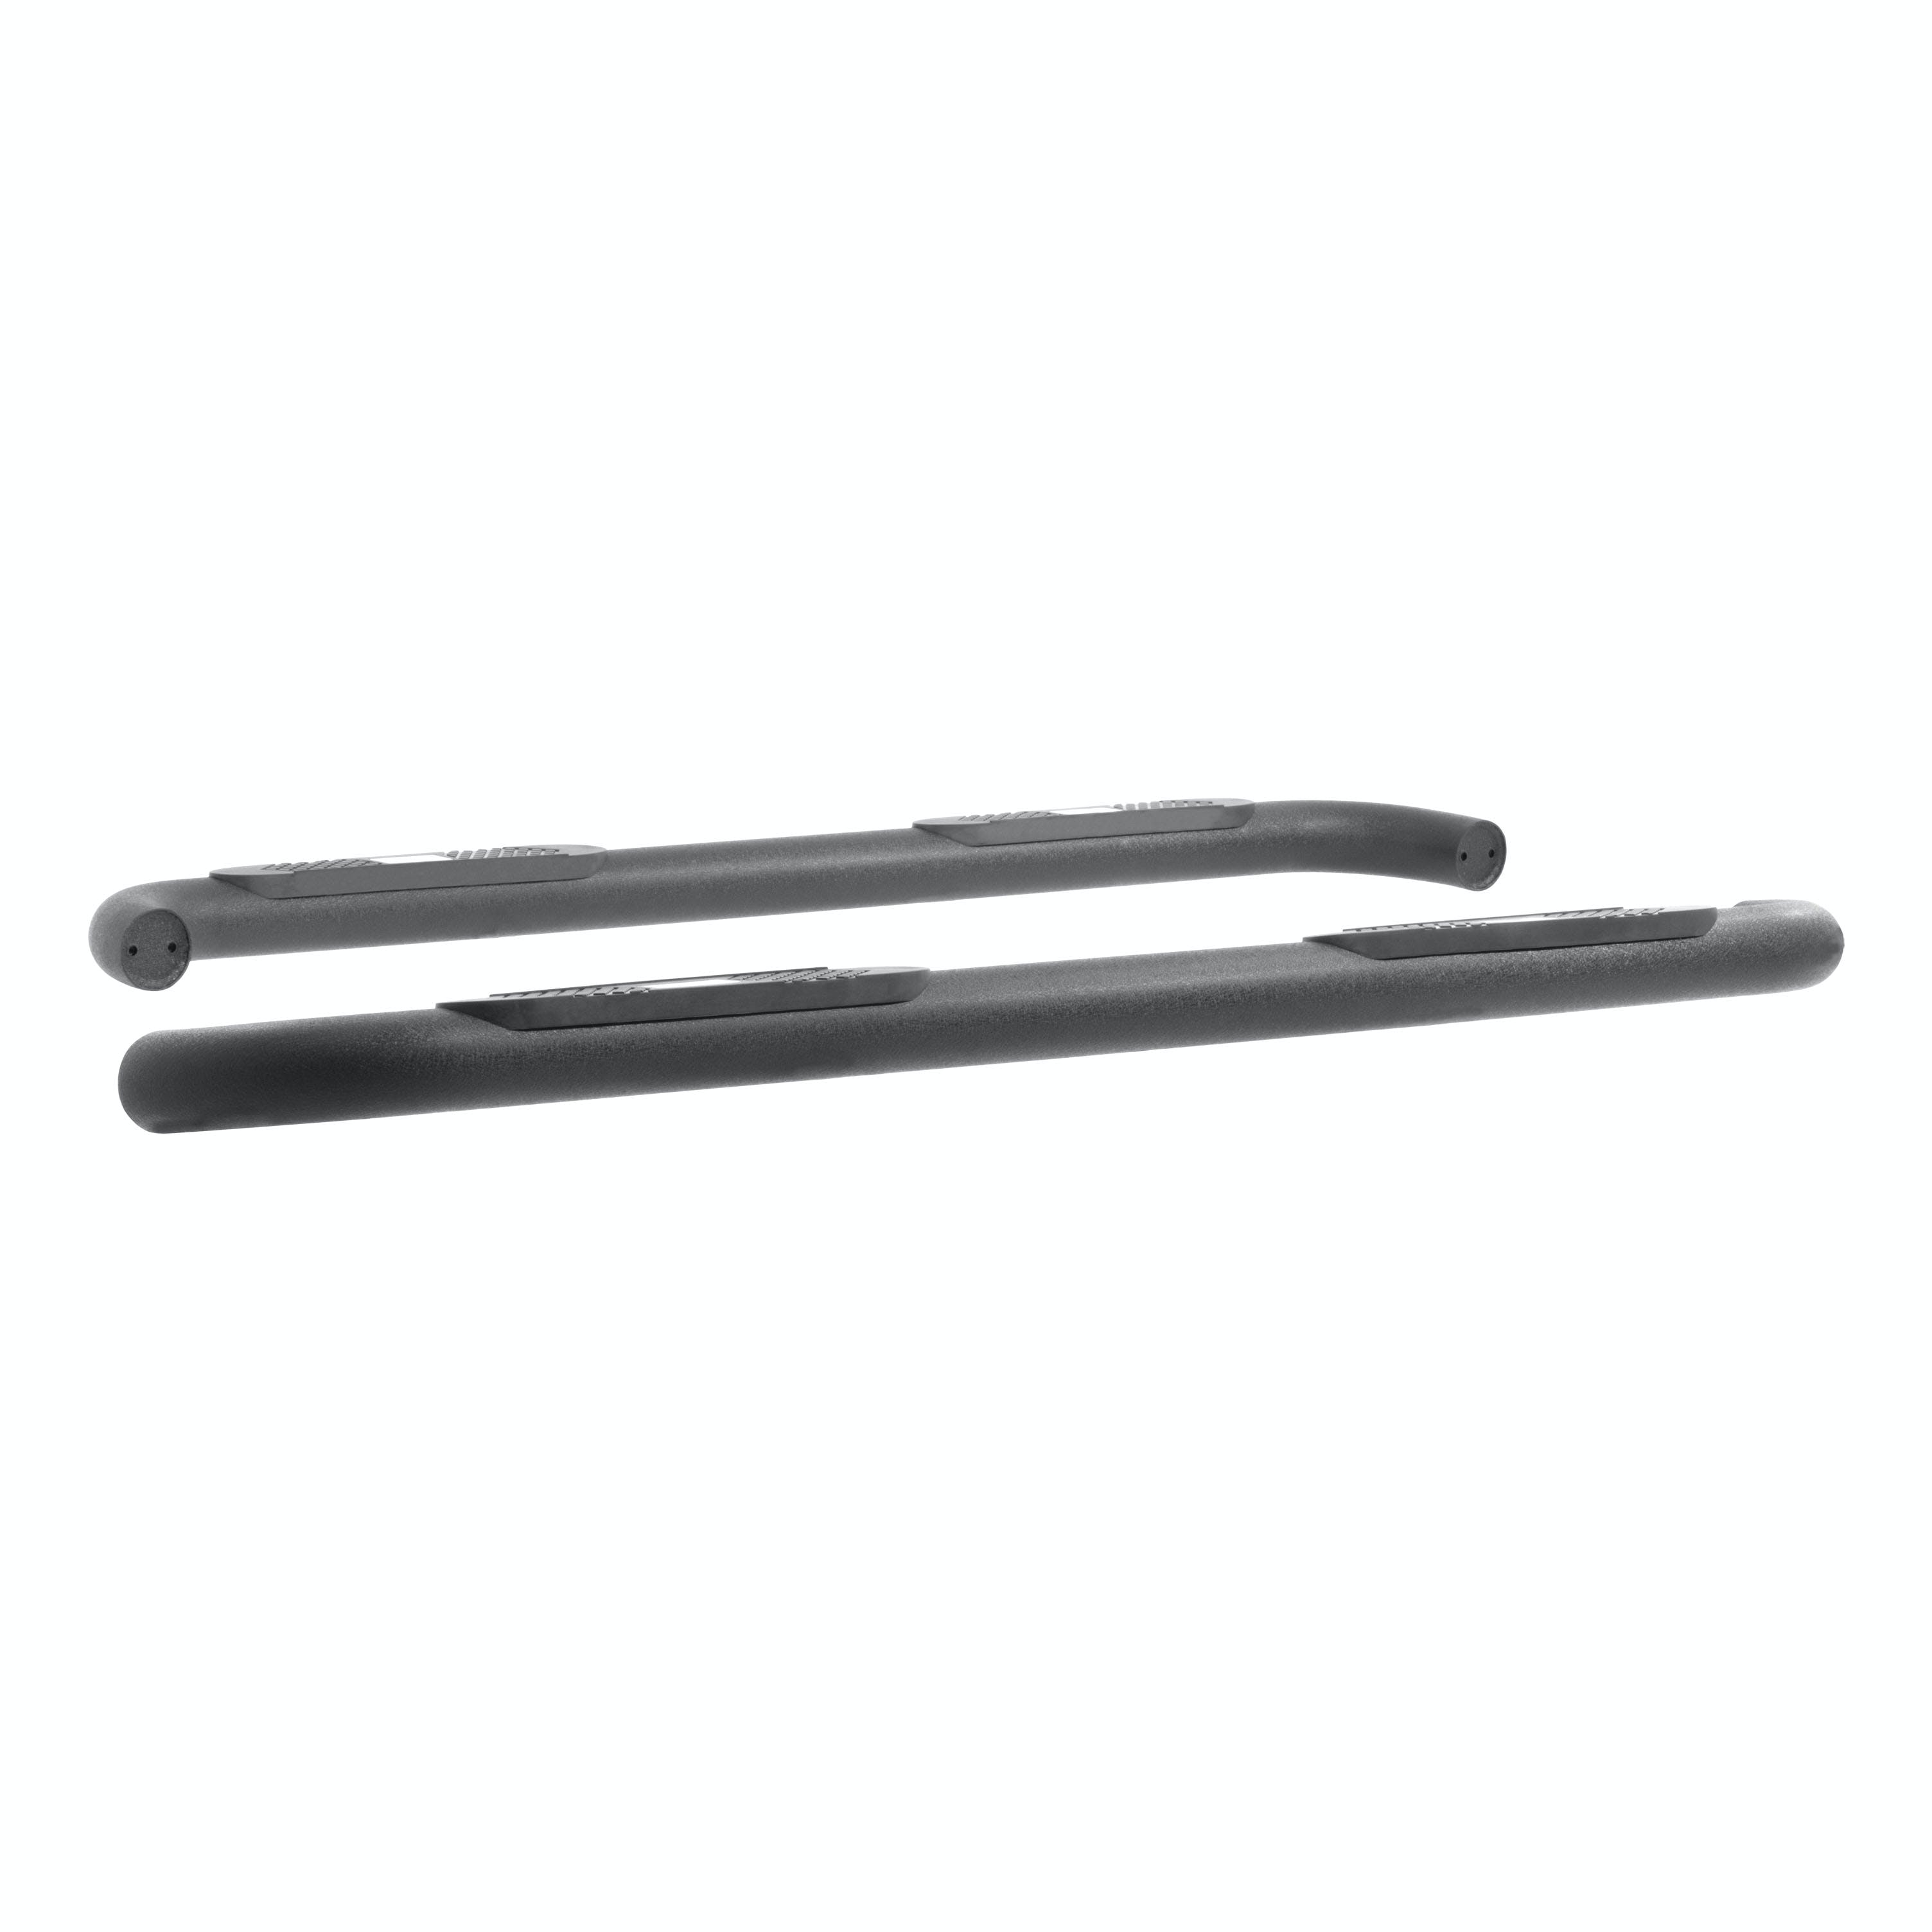 CURT 17536 Replacement TruTrack Weight Distribution Spring Bar